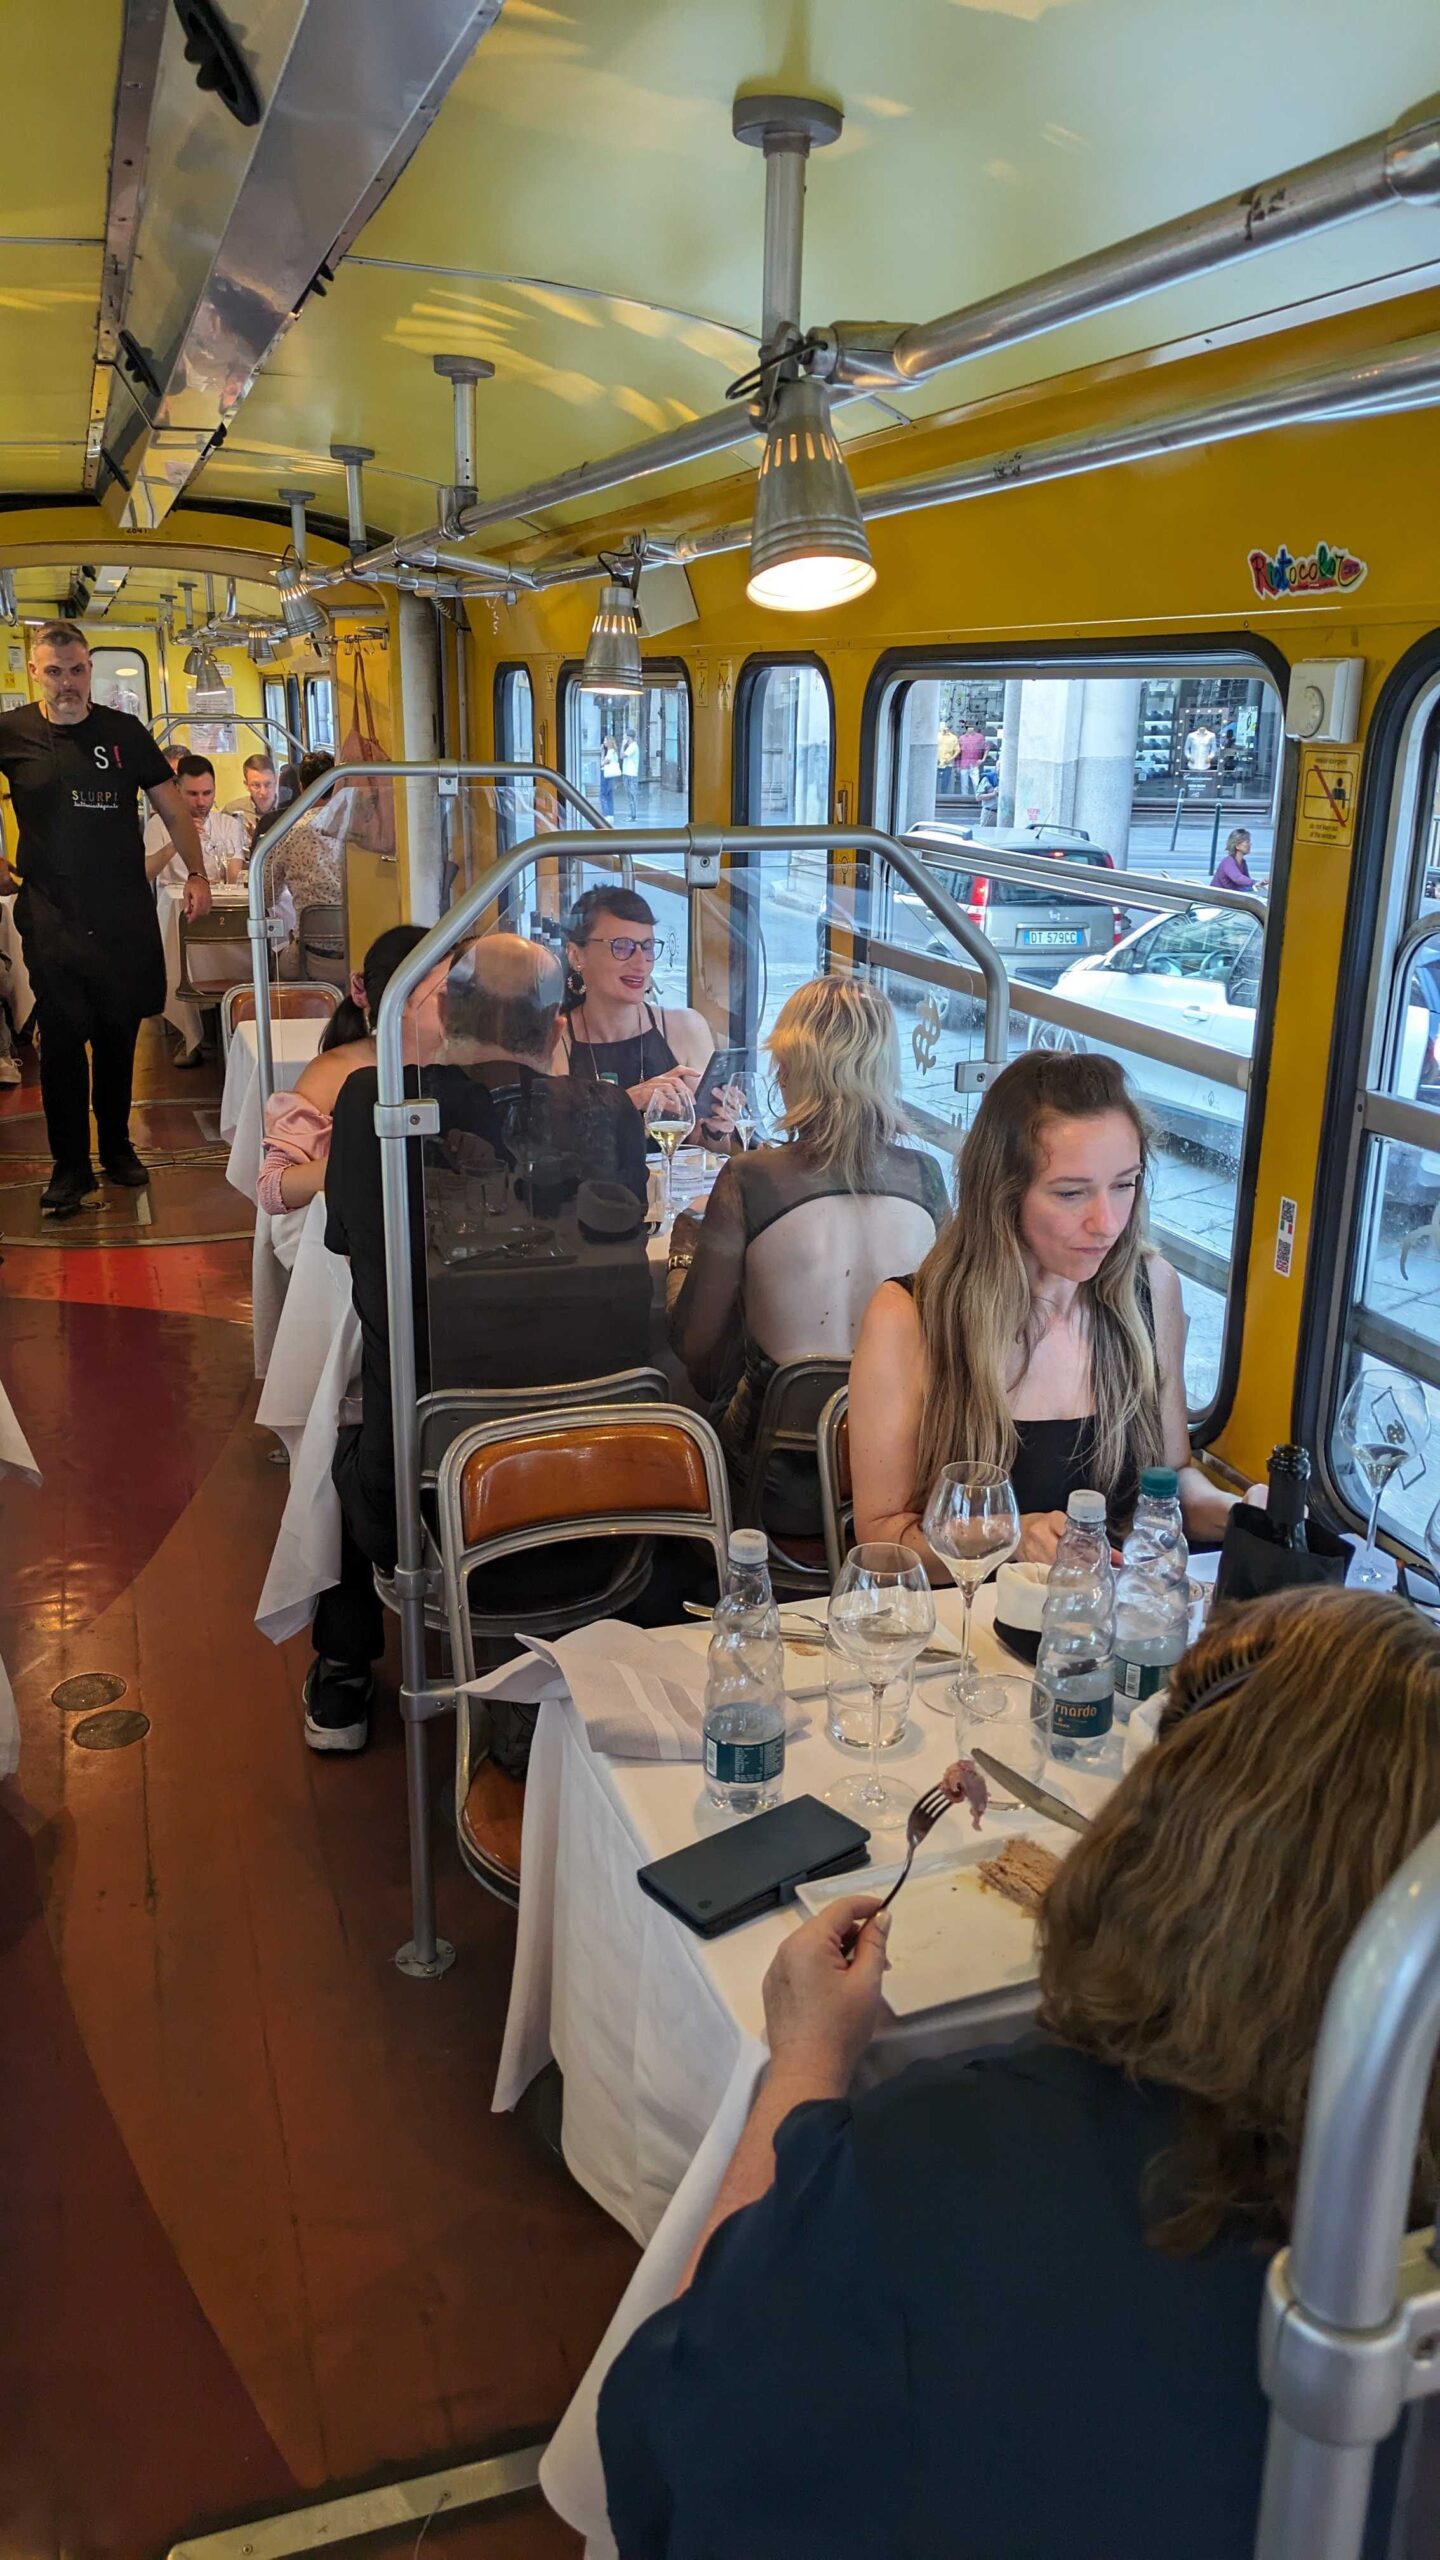 multiple tables of people eating inside the tram, the waiter walks down the centre aisle.